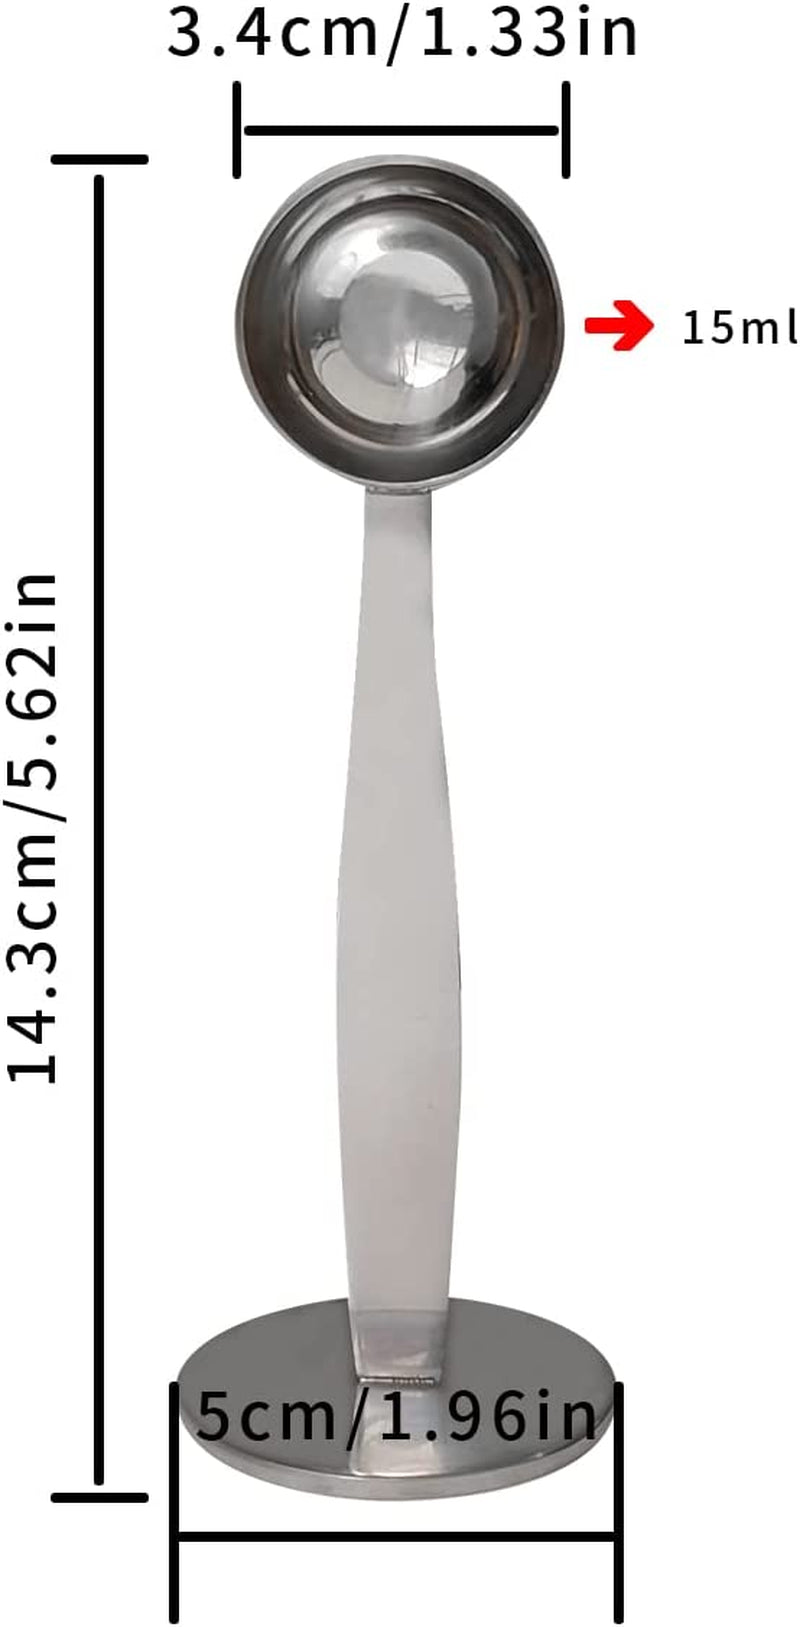 2-in-1 Coffee Scoops, 304 Stainless Steel Tablespoon Measure Spoon, with Pressed Bottom for Coffee Bean Press Coffee Grinding Pressing（Silver15 ml）